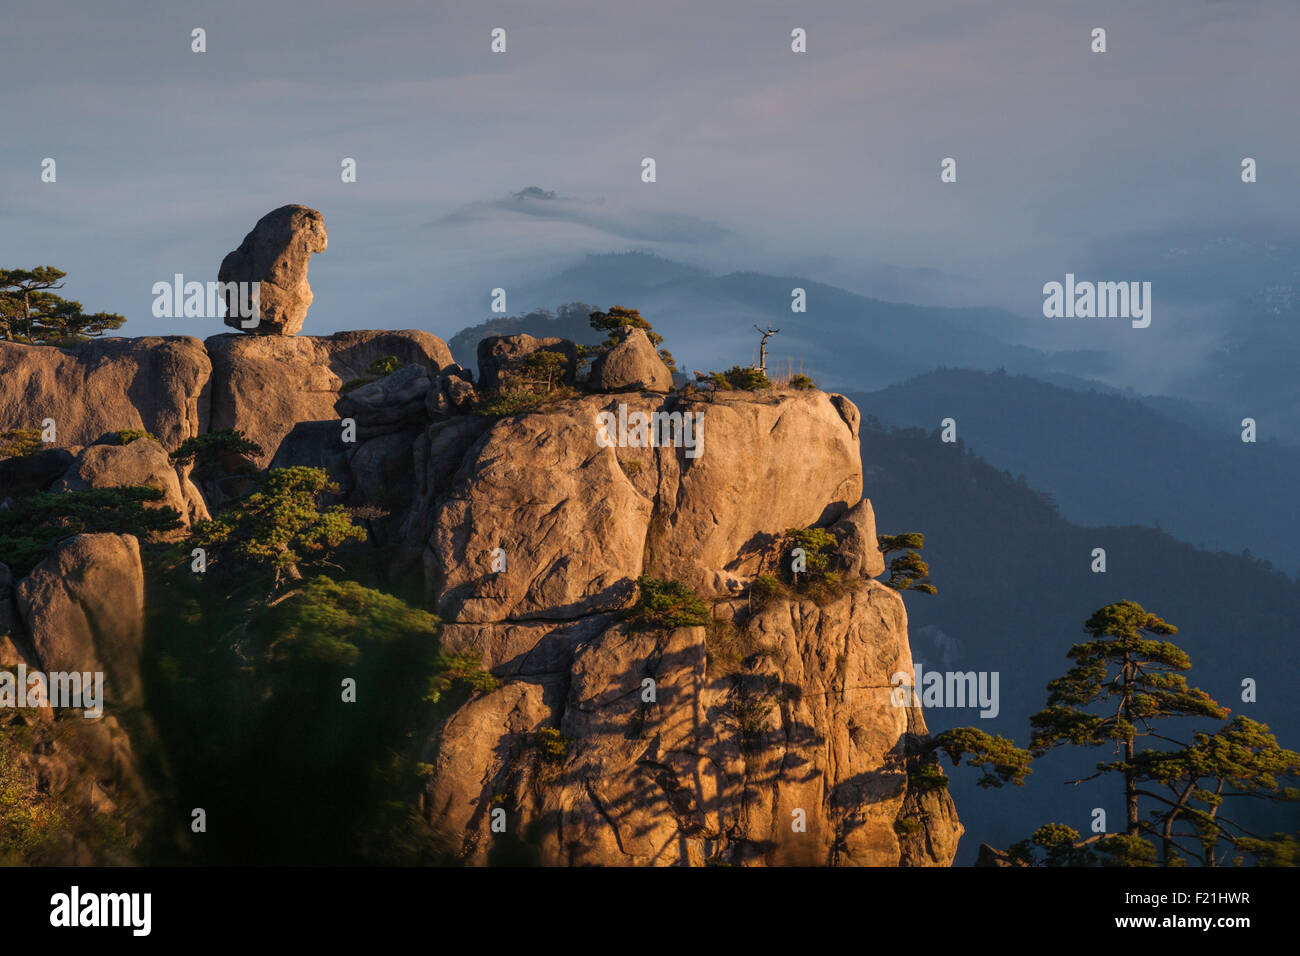 'Stone Monkey Watching the Sea' odd shaped boulder sits on a rocky ledge above North Sea vista, Yellow Mountain, Huang Shan Stock Photo